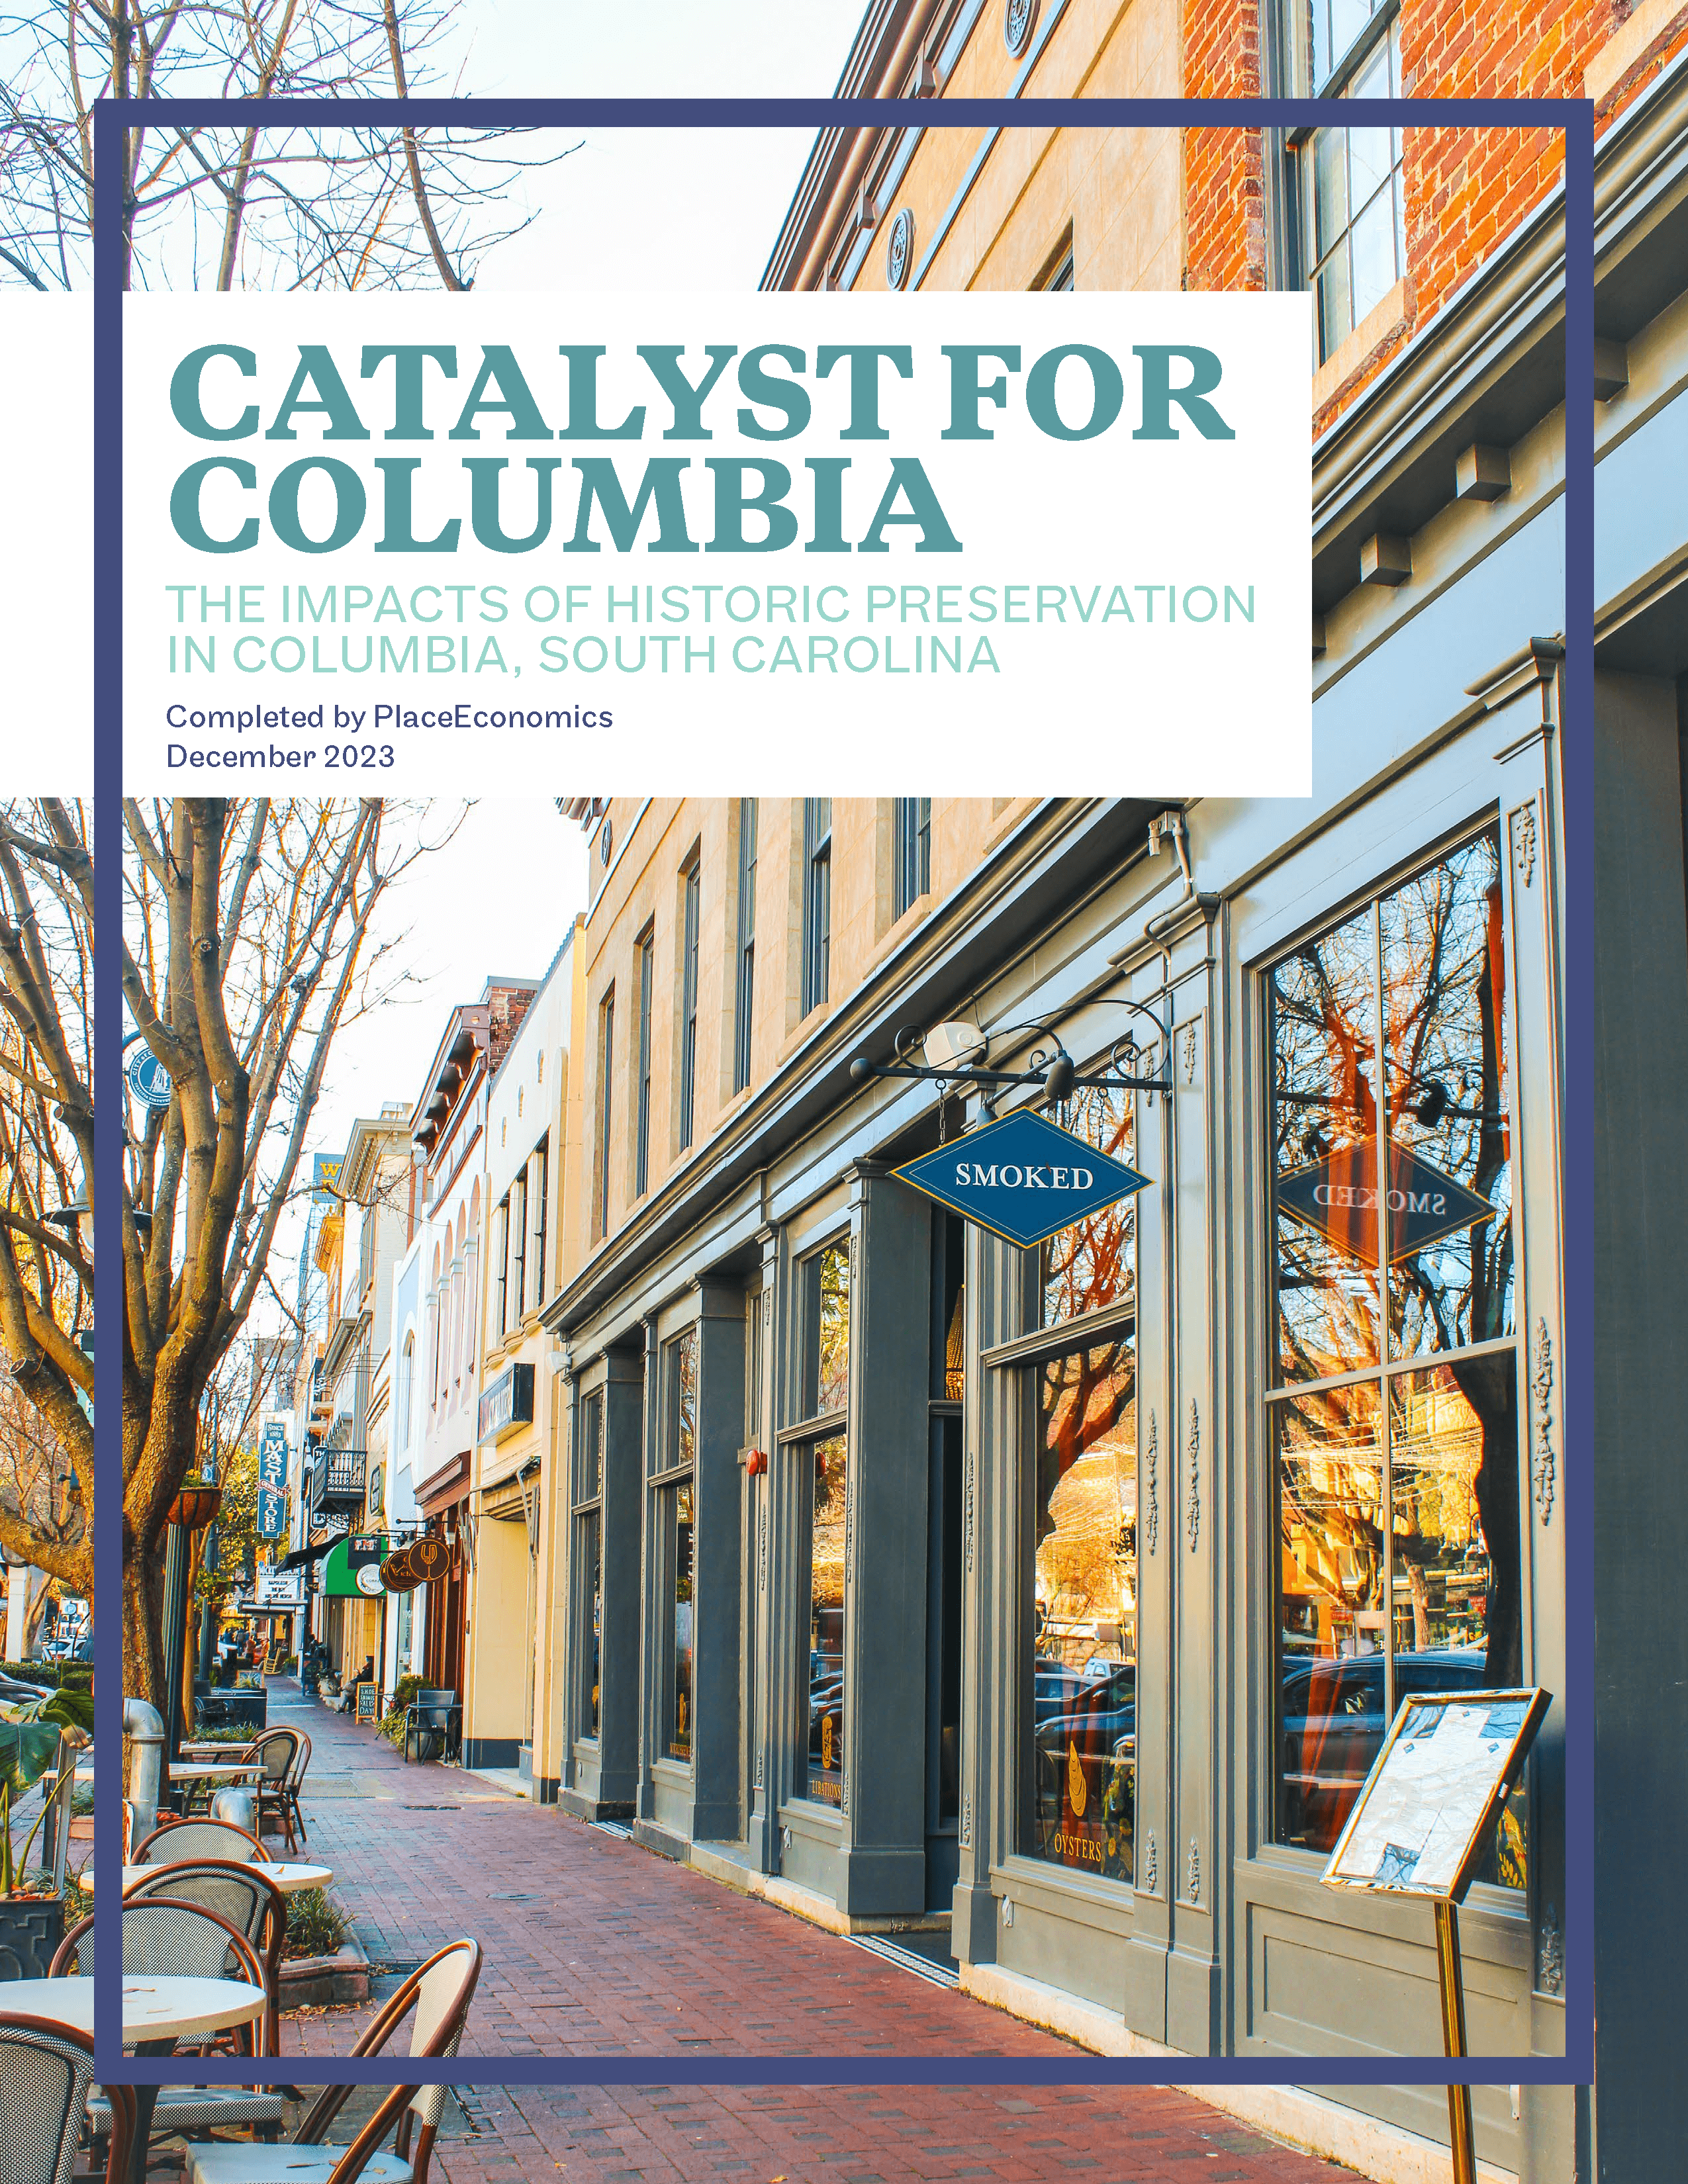 Cover of the the report, which is a photograph of building facades along Columbia's main street, with text in the upper third of the report on a white background which reads: "Catalyst for Columbia The Impacts of Historic Preservation in Columbia, South Carolina Completed by PlaceEconomics December 2023